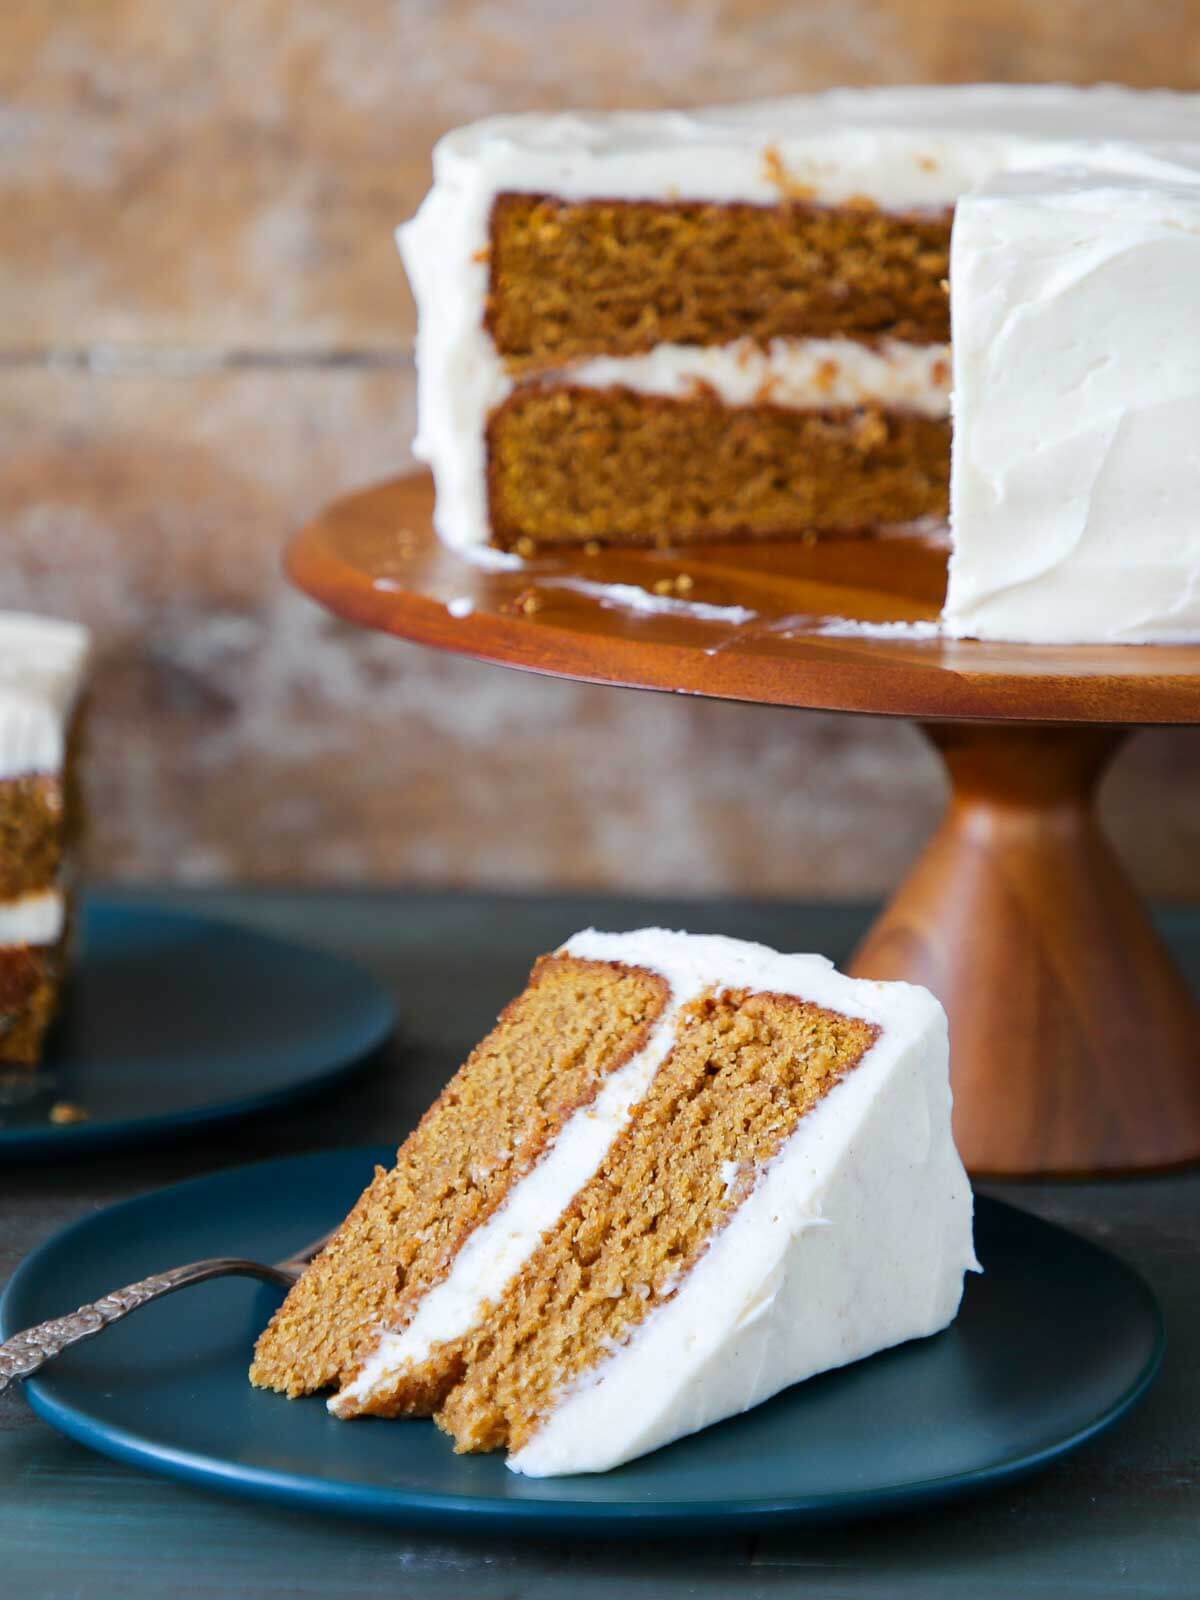 A whole pumpkin cake with a plated slice ready for eating.